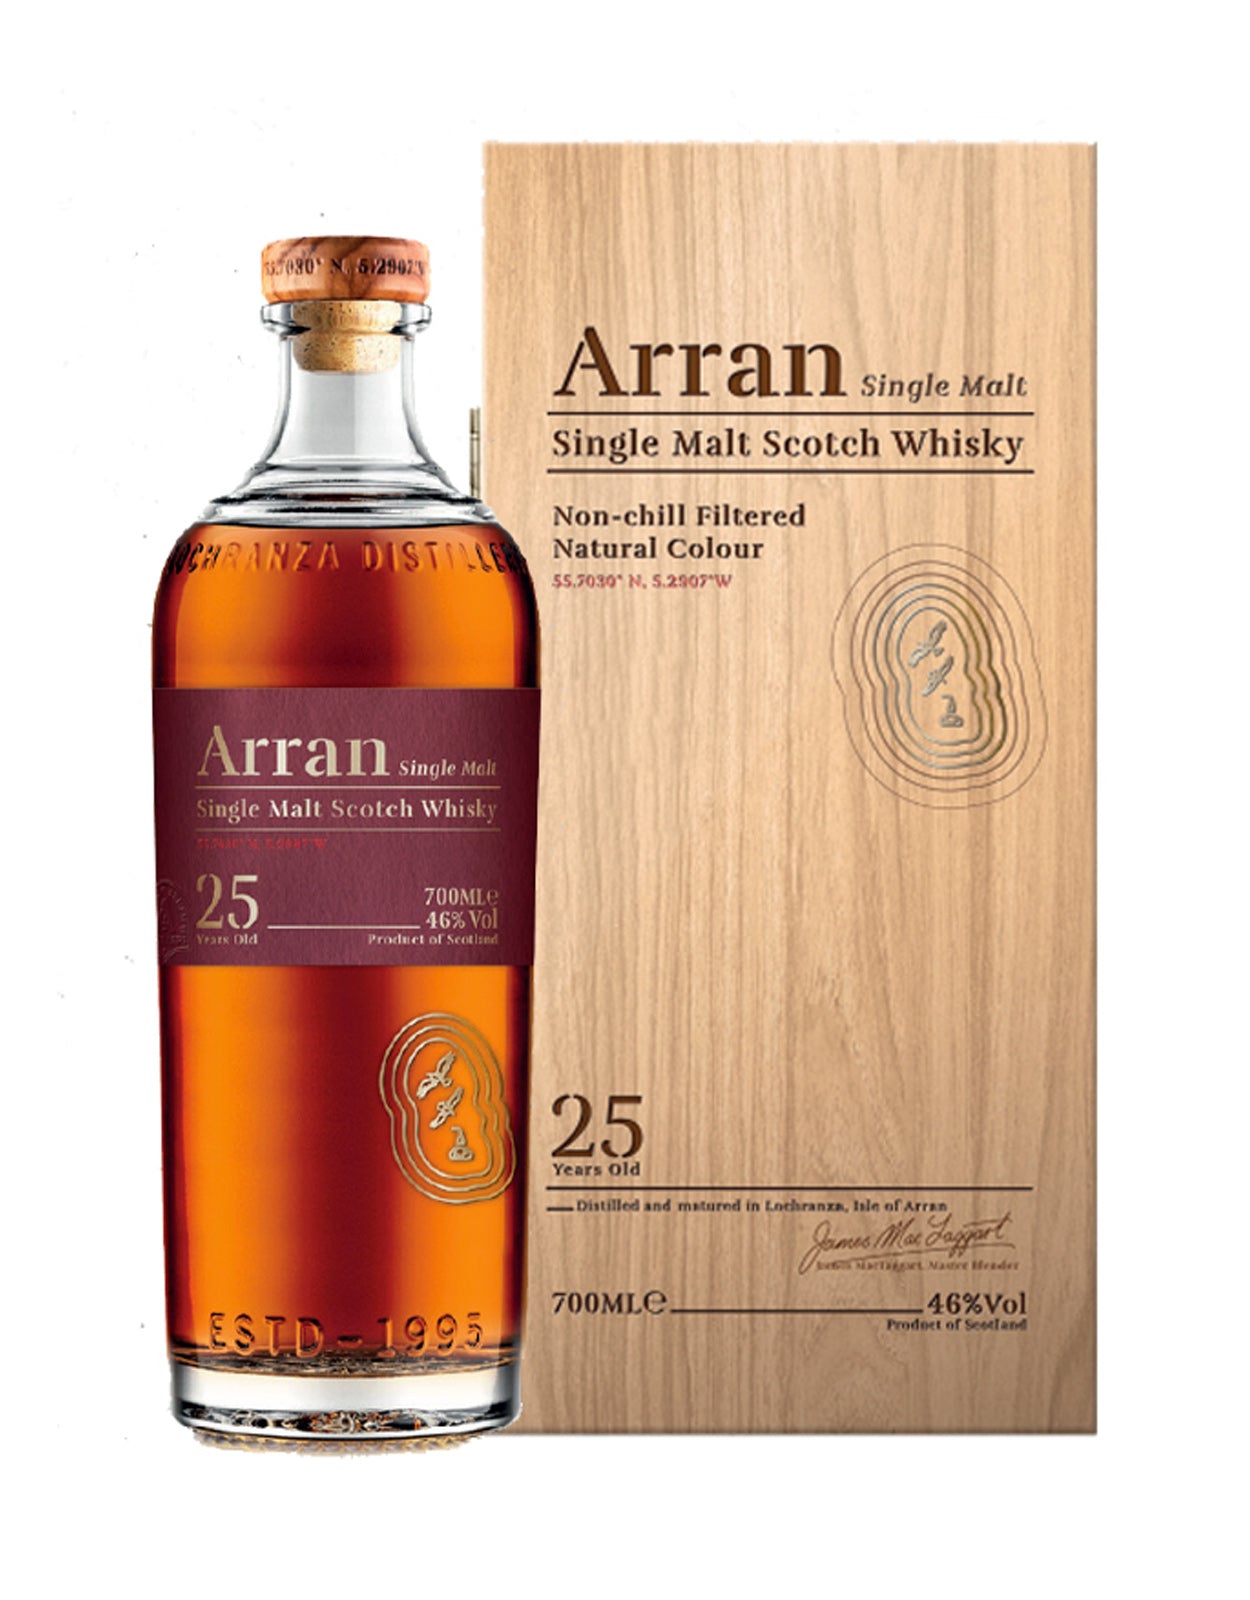 The Arran 25 Year Old